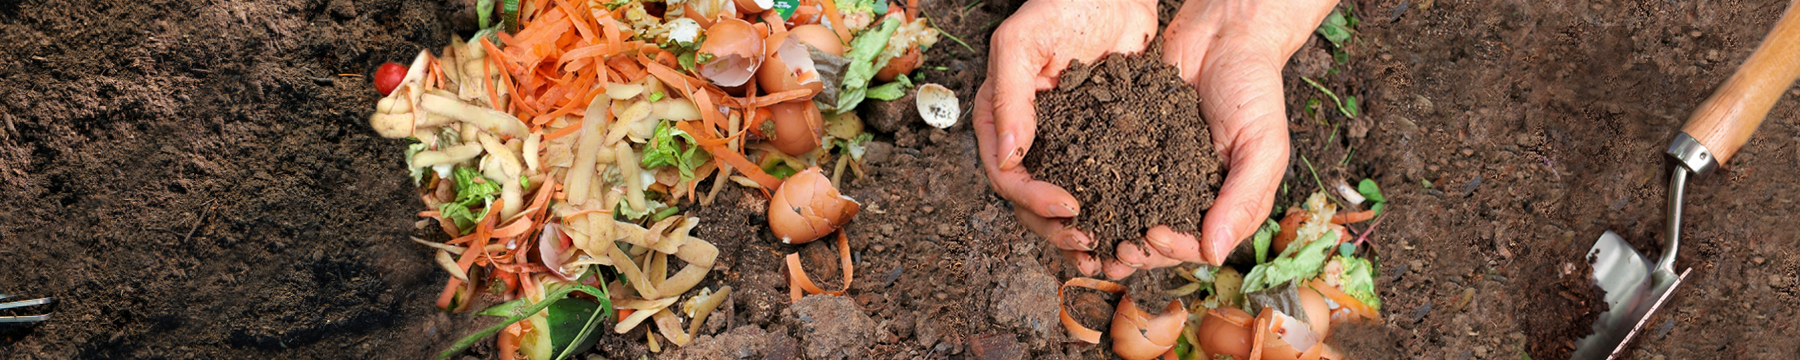 garden bed with vegetable peelings and hands holding soil